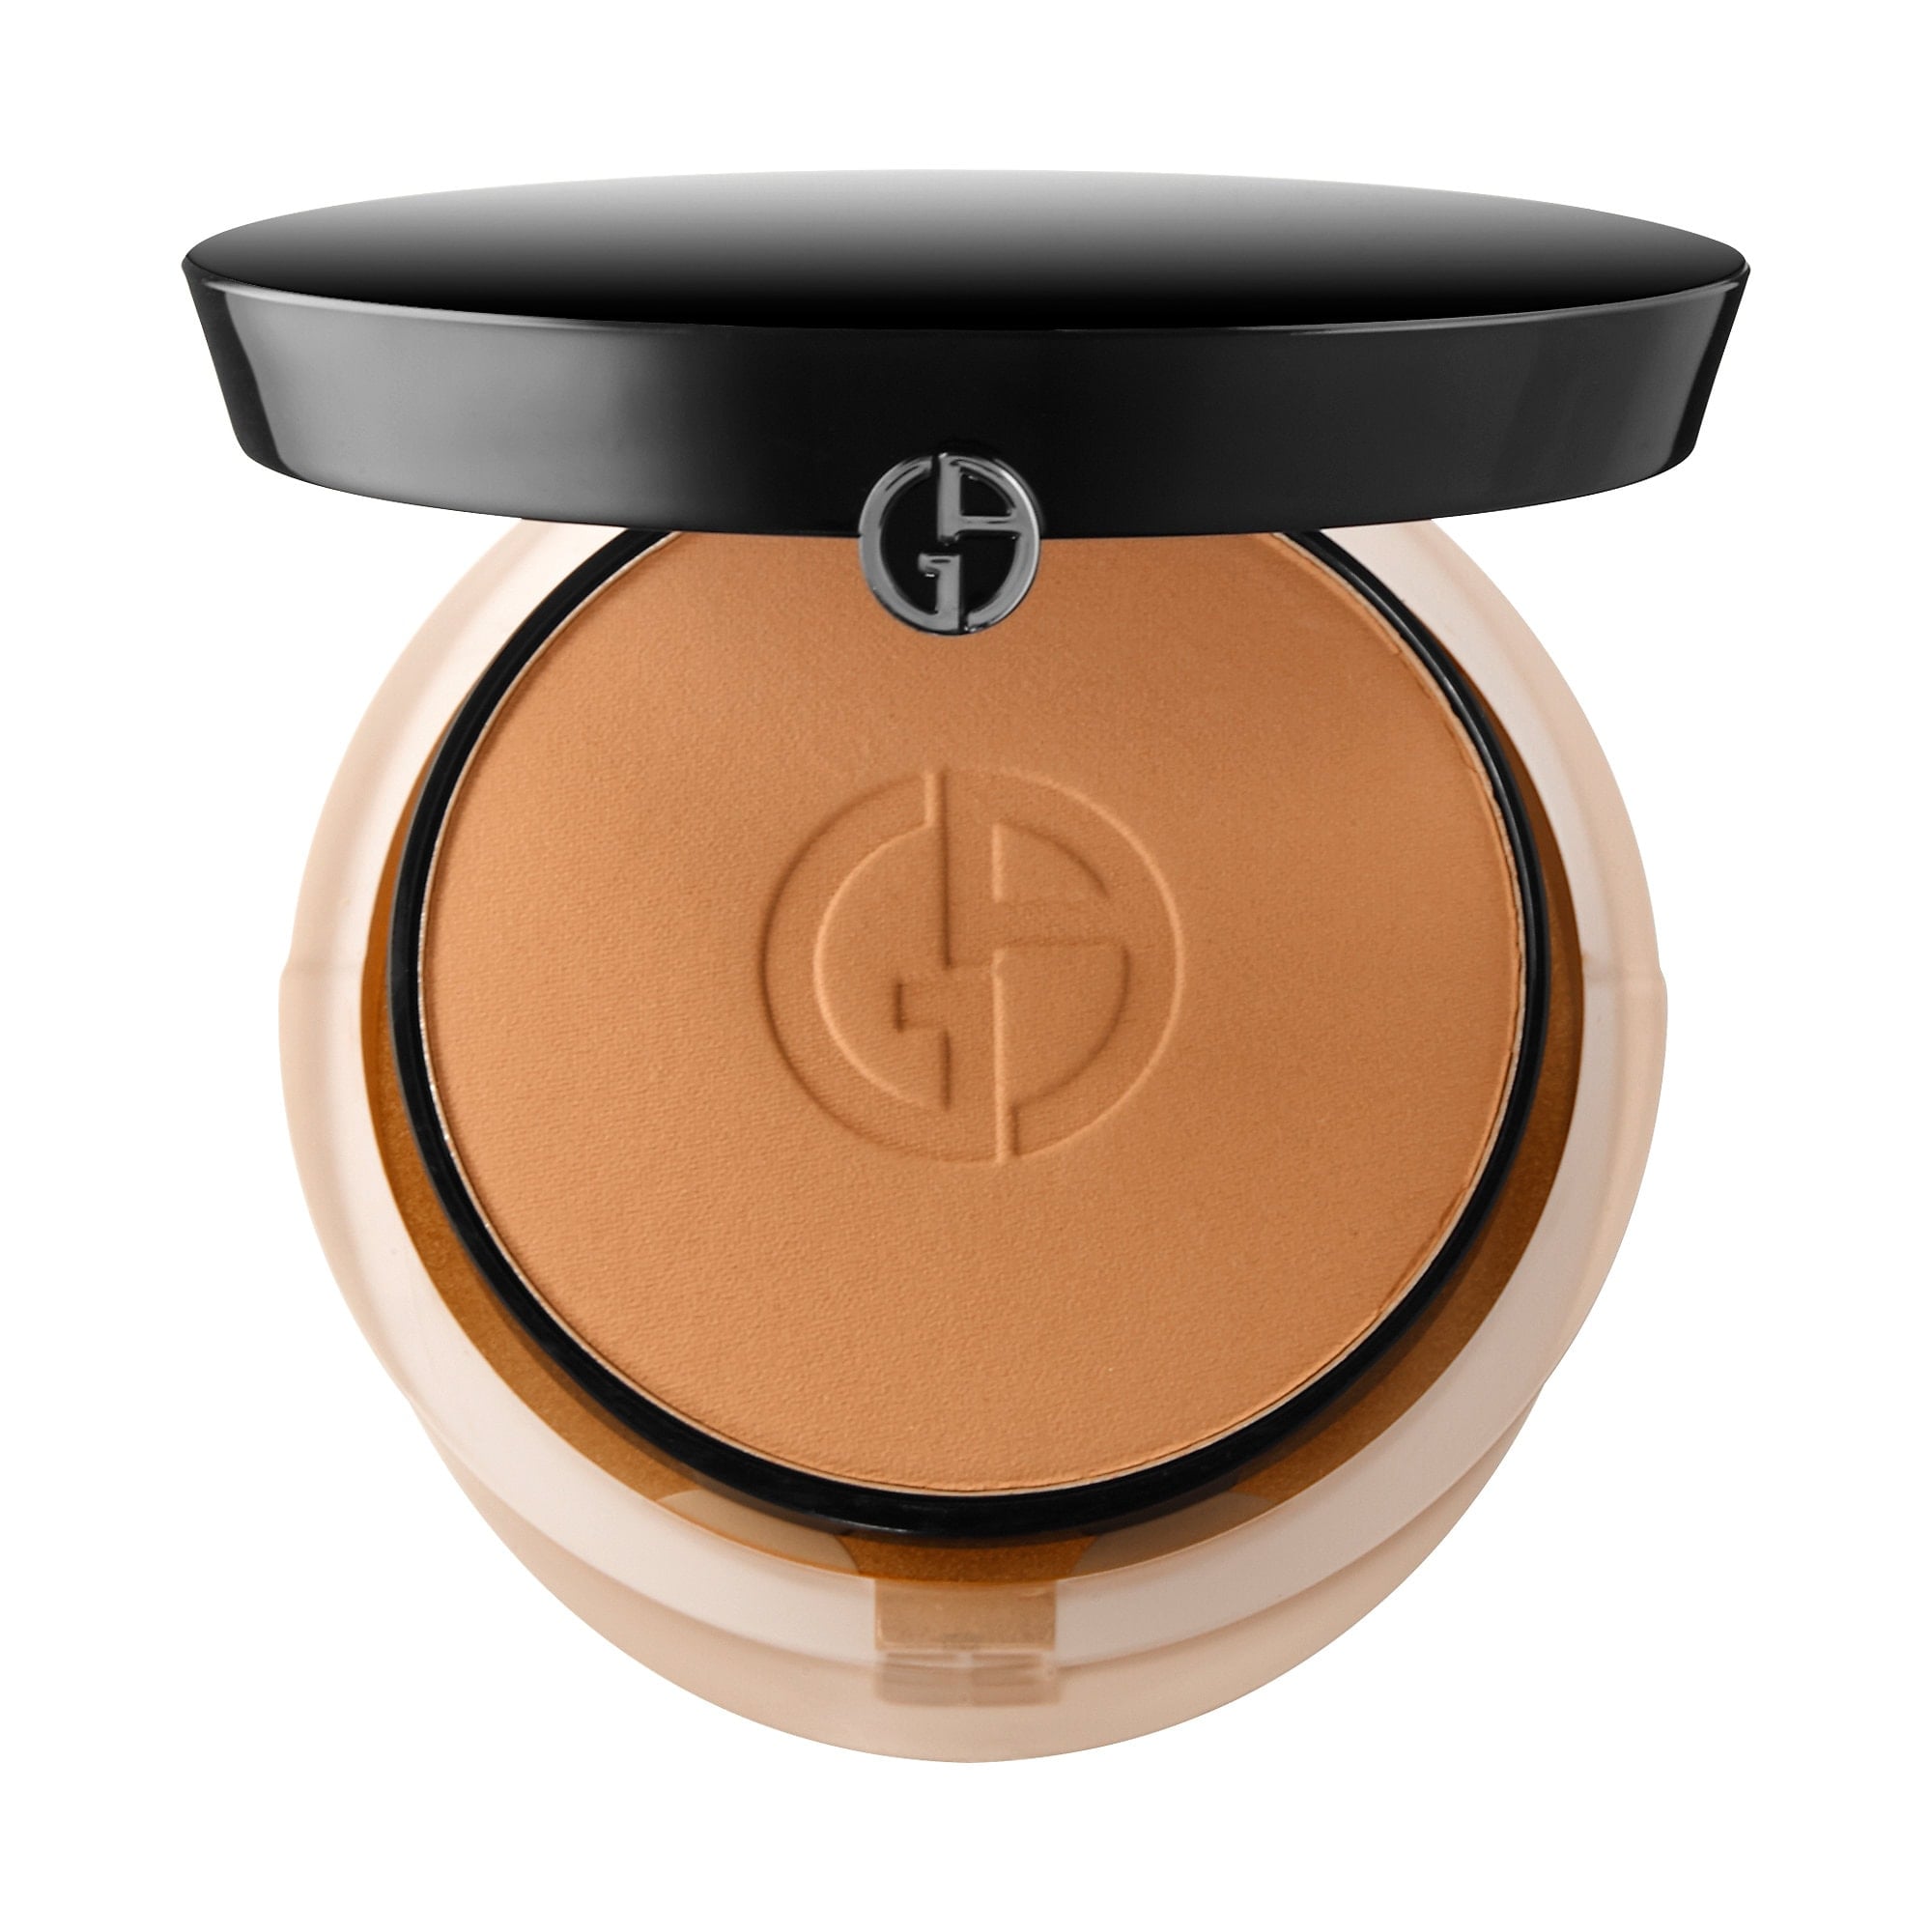 Armani Beauty Luminous Silk Compact Powder Foundation | 14 Top-Rated  Compact Foundations From Sephora That Can Fit in Even the Tiniest Clutch |  POPSUGAR Beauty Photo 15